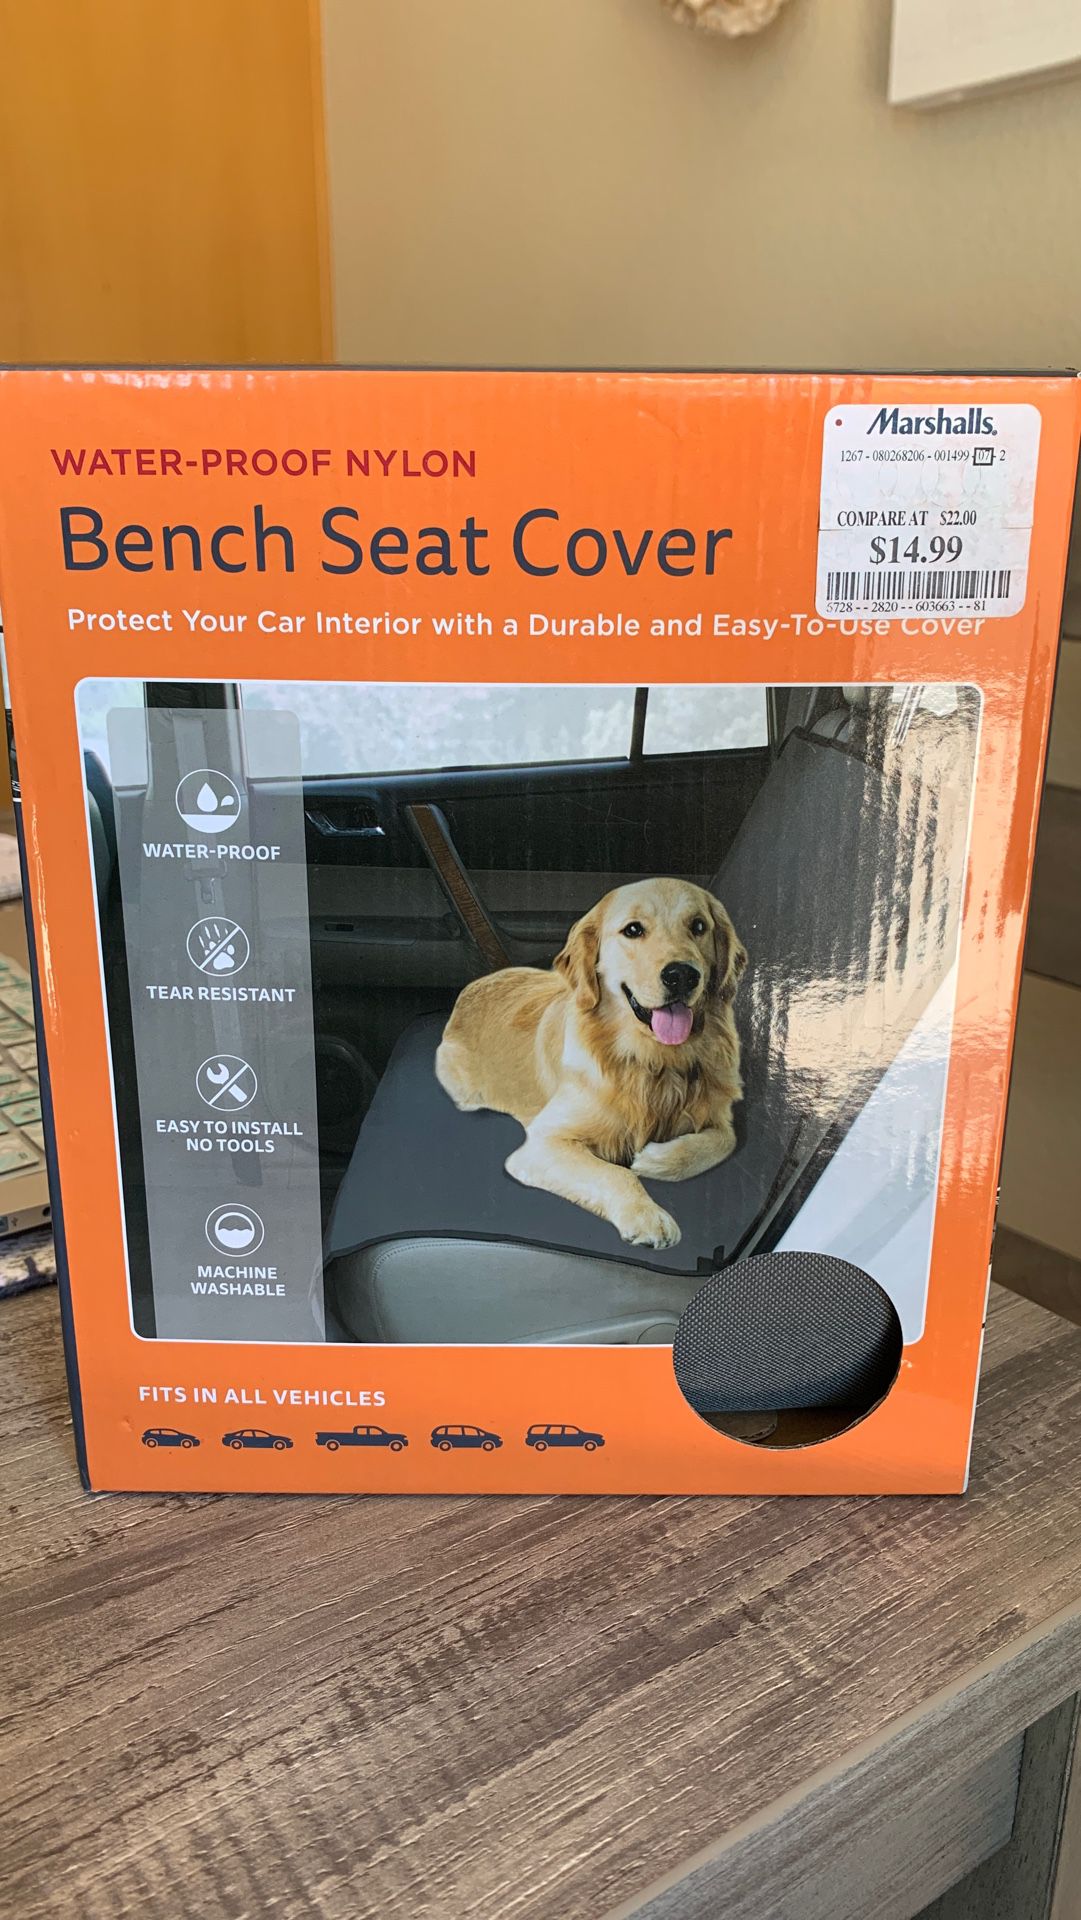 Car Bench Seat Cover for Pets (Water-Proof Nylon) NEW!